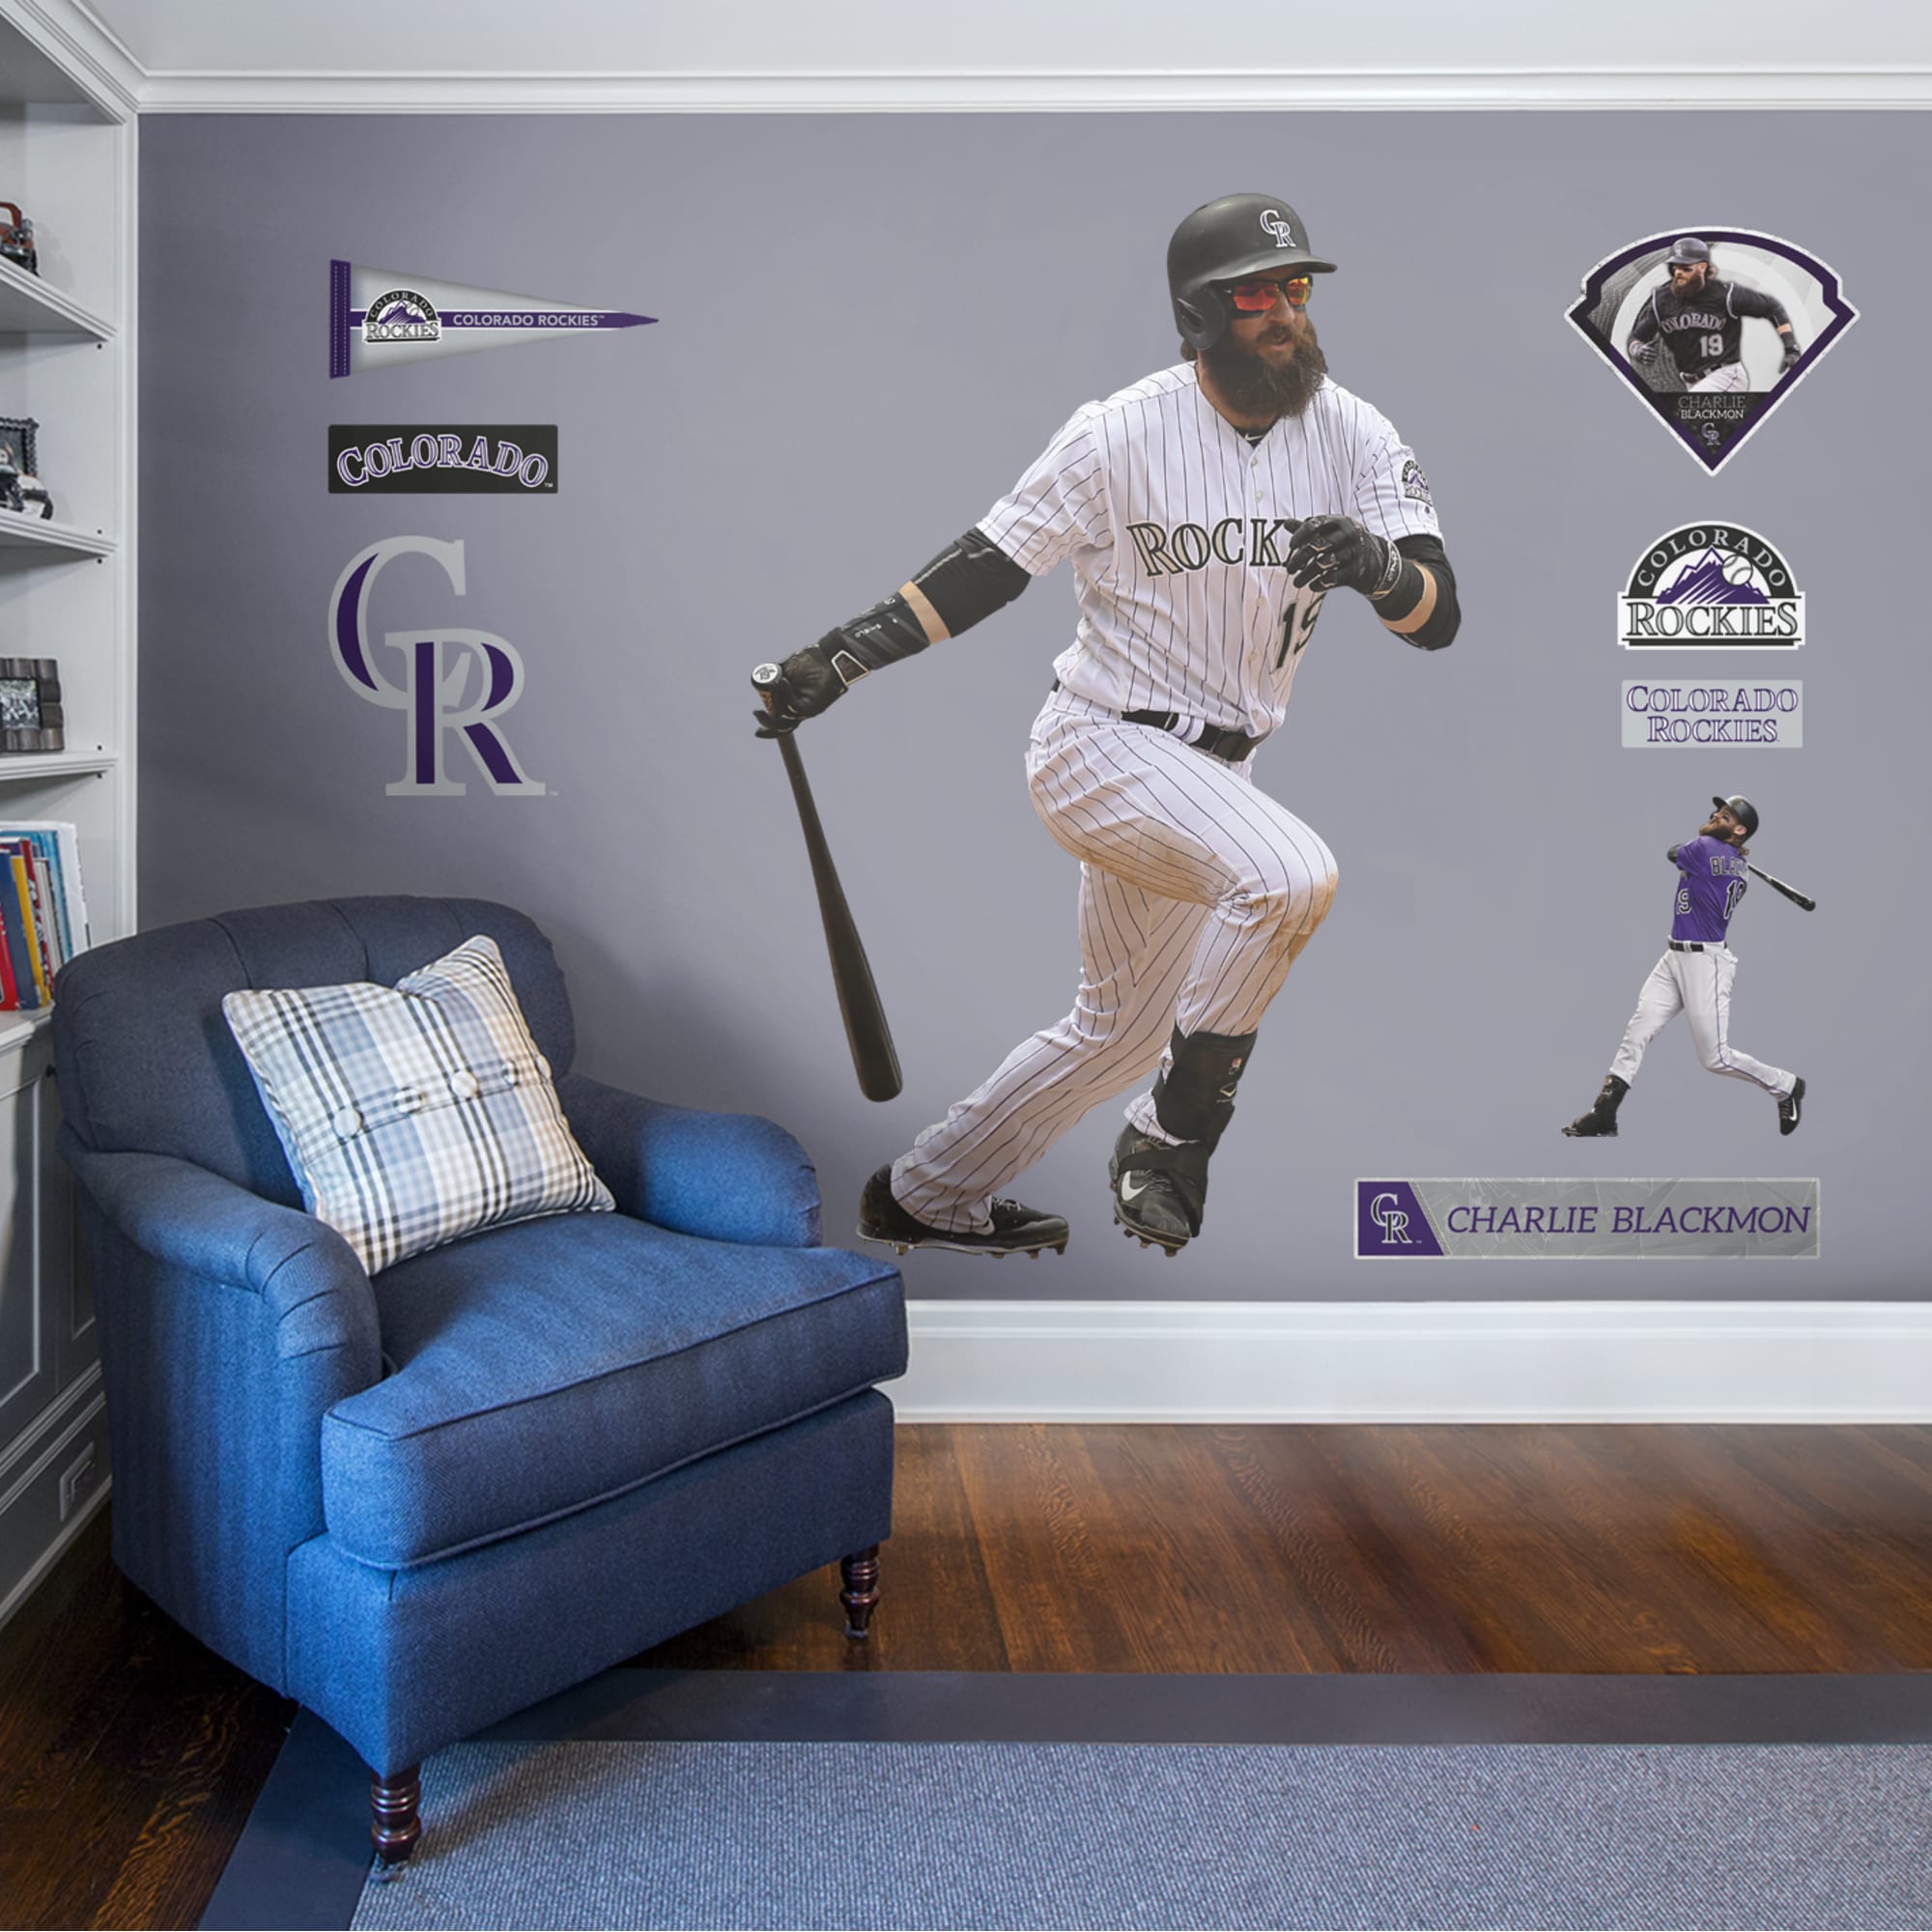 Charlie Blackmon for Colorado Rockies - Officially Licensed MLB Removable Wall Decal Life-Size Athlete + 10 Decals (50"W x 75"H)